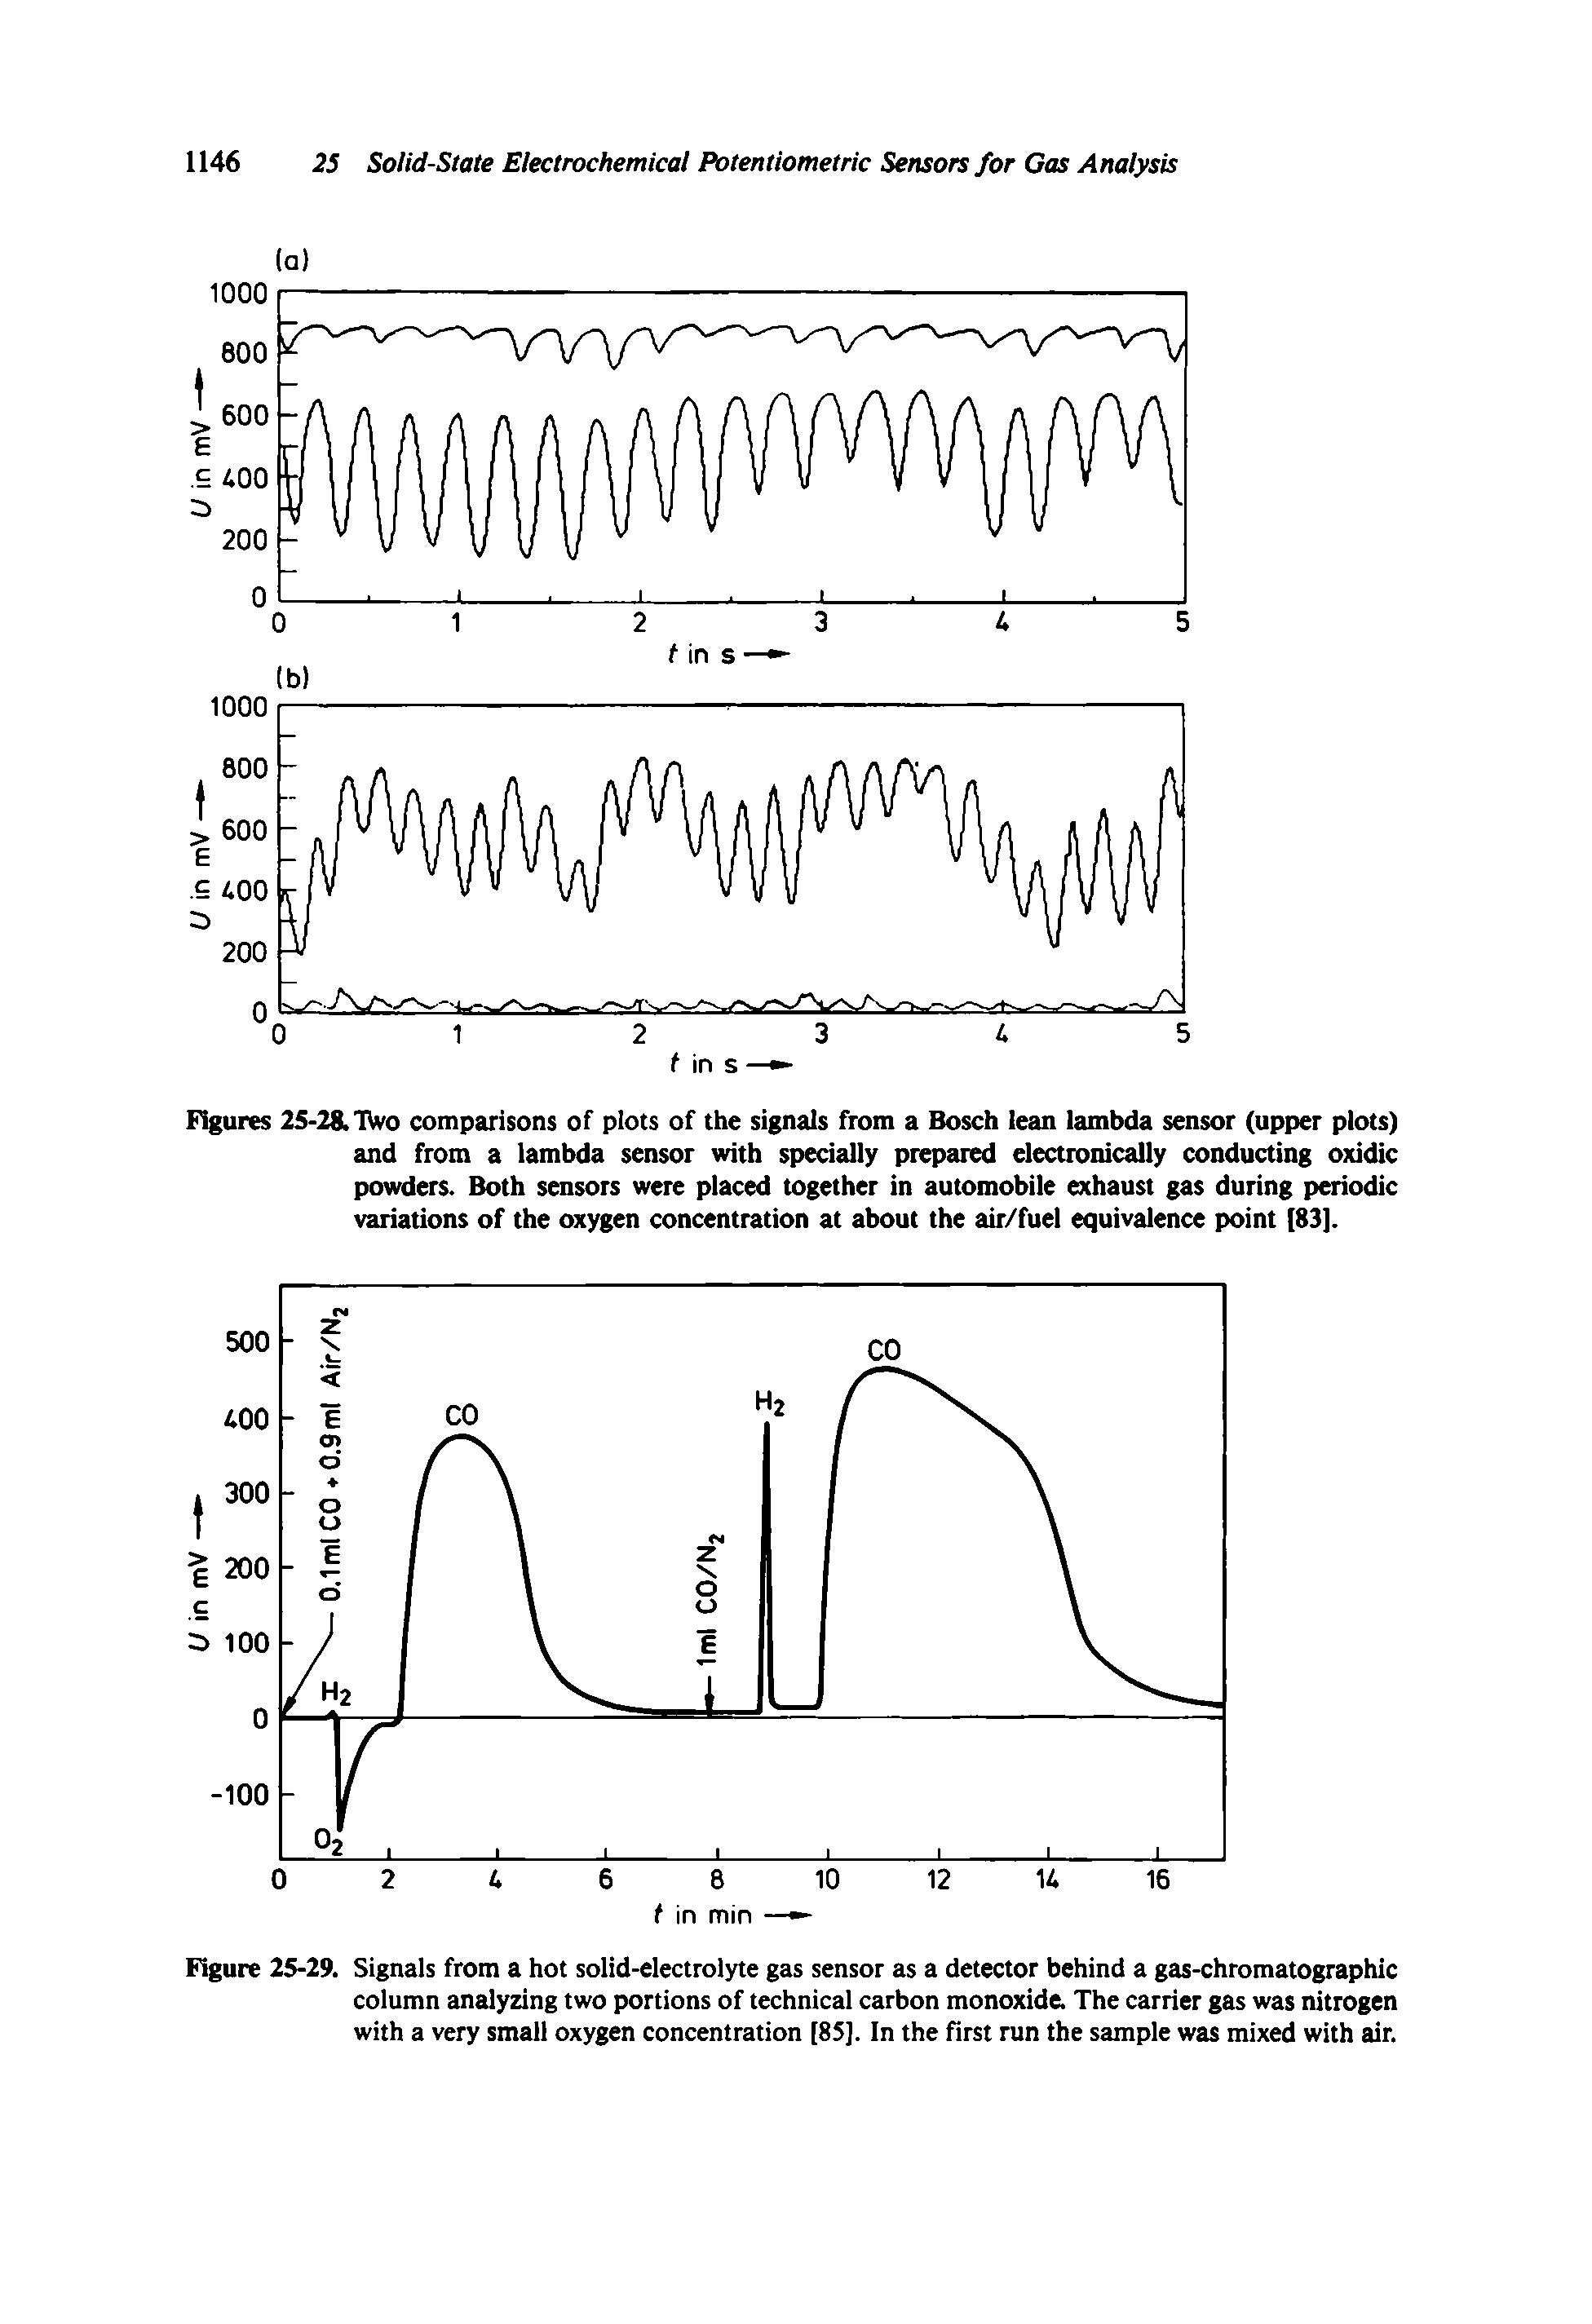 Figures 25-28. IWo comparisons of plots of the signals from a Bosch lean lambda sensor (upper plots) and from a lambda sensor with specially prepared electronically conducting oxidic powders. Both sensors were placed together in automobile exhaust gas during periodic variations of the oxygen concentration at about the air/fuel equivalence point (83].